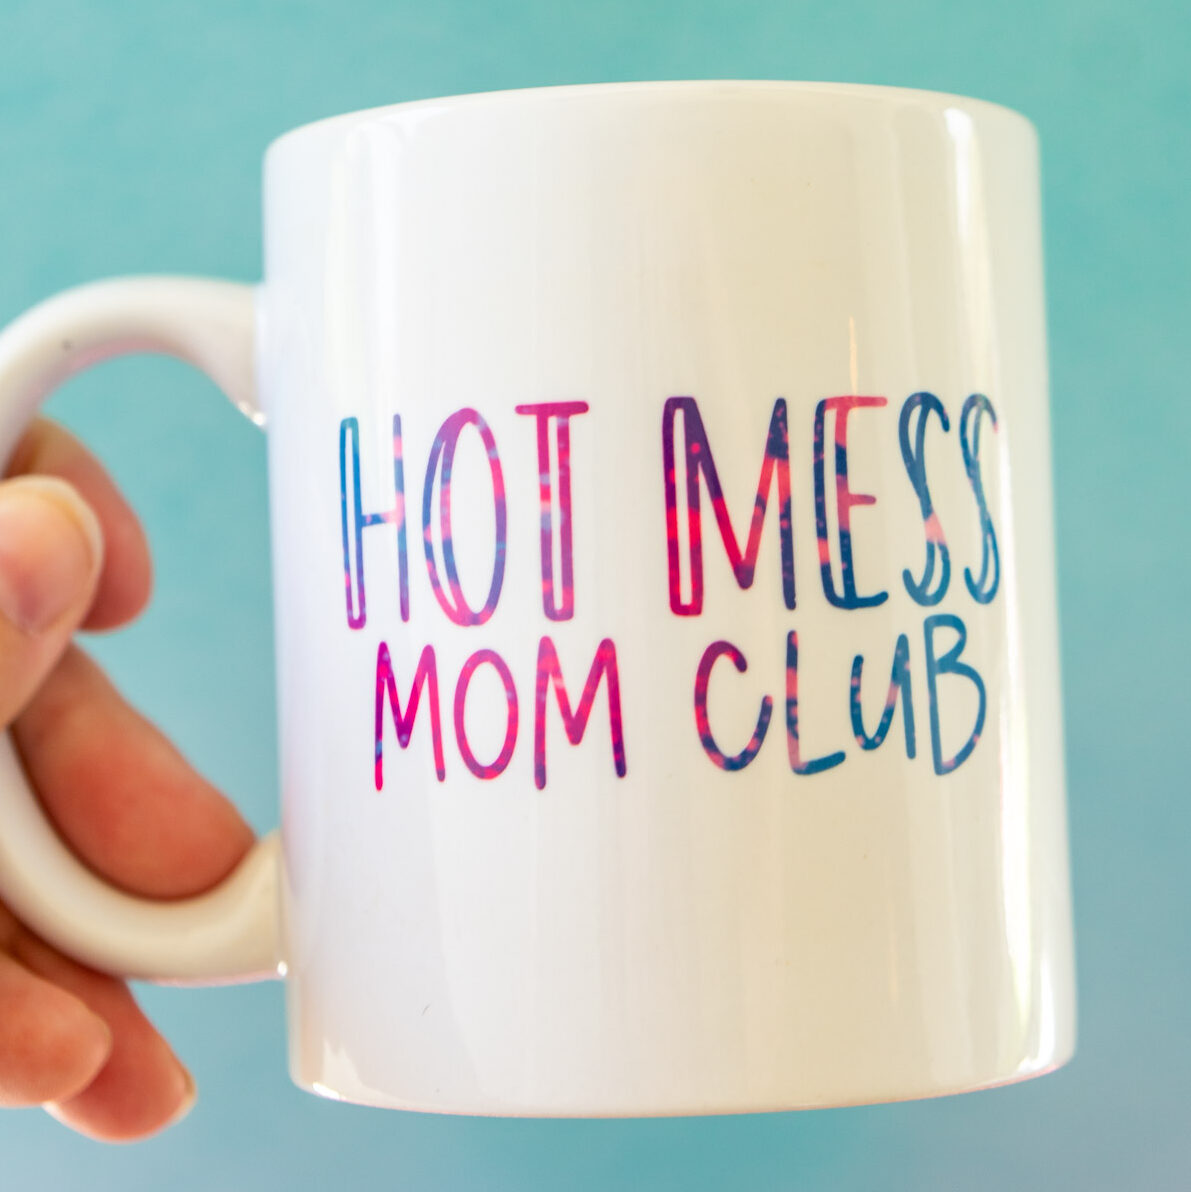 The ultimate funny mom mug. Because it's true.